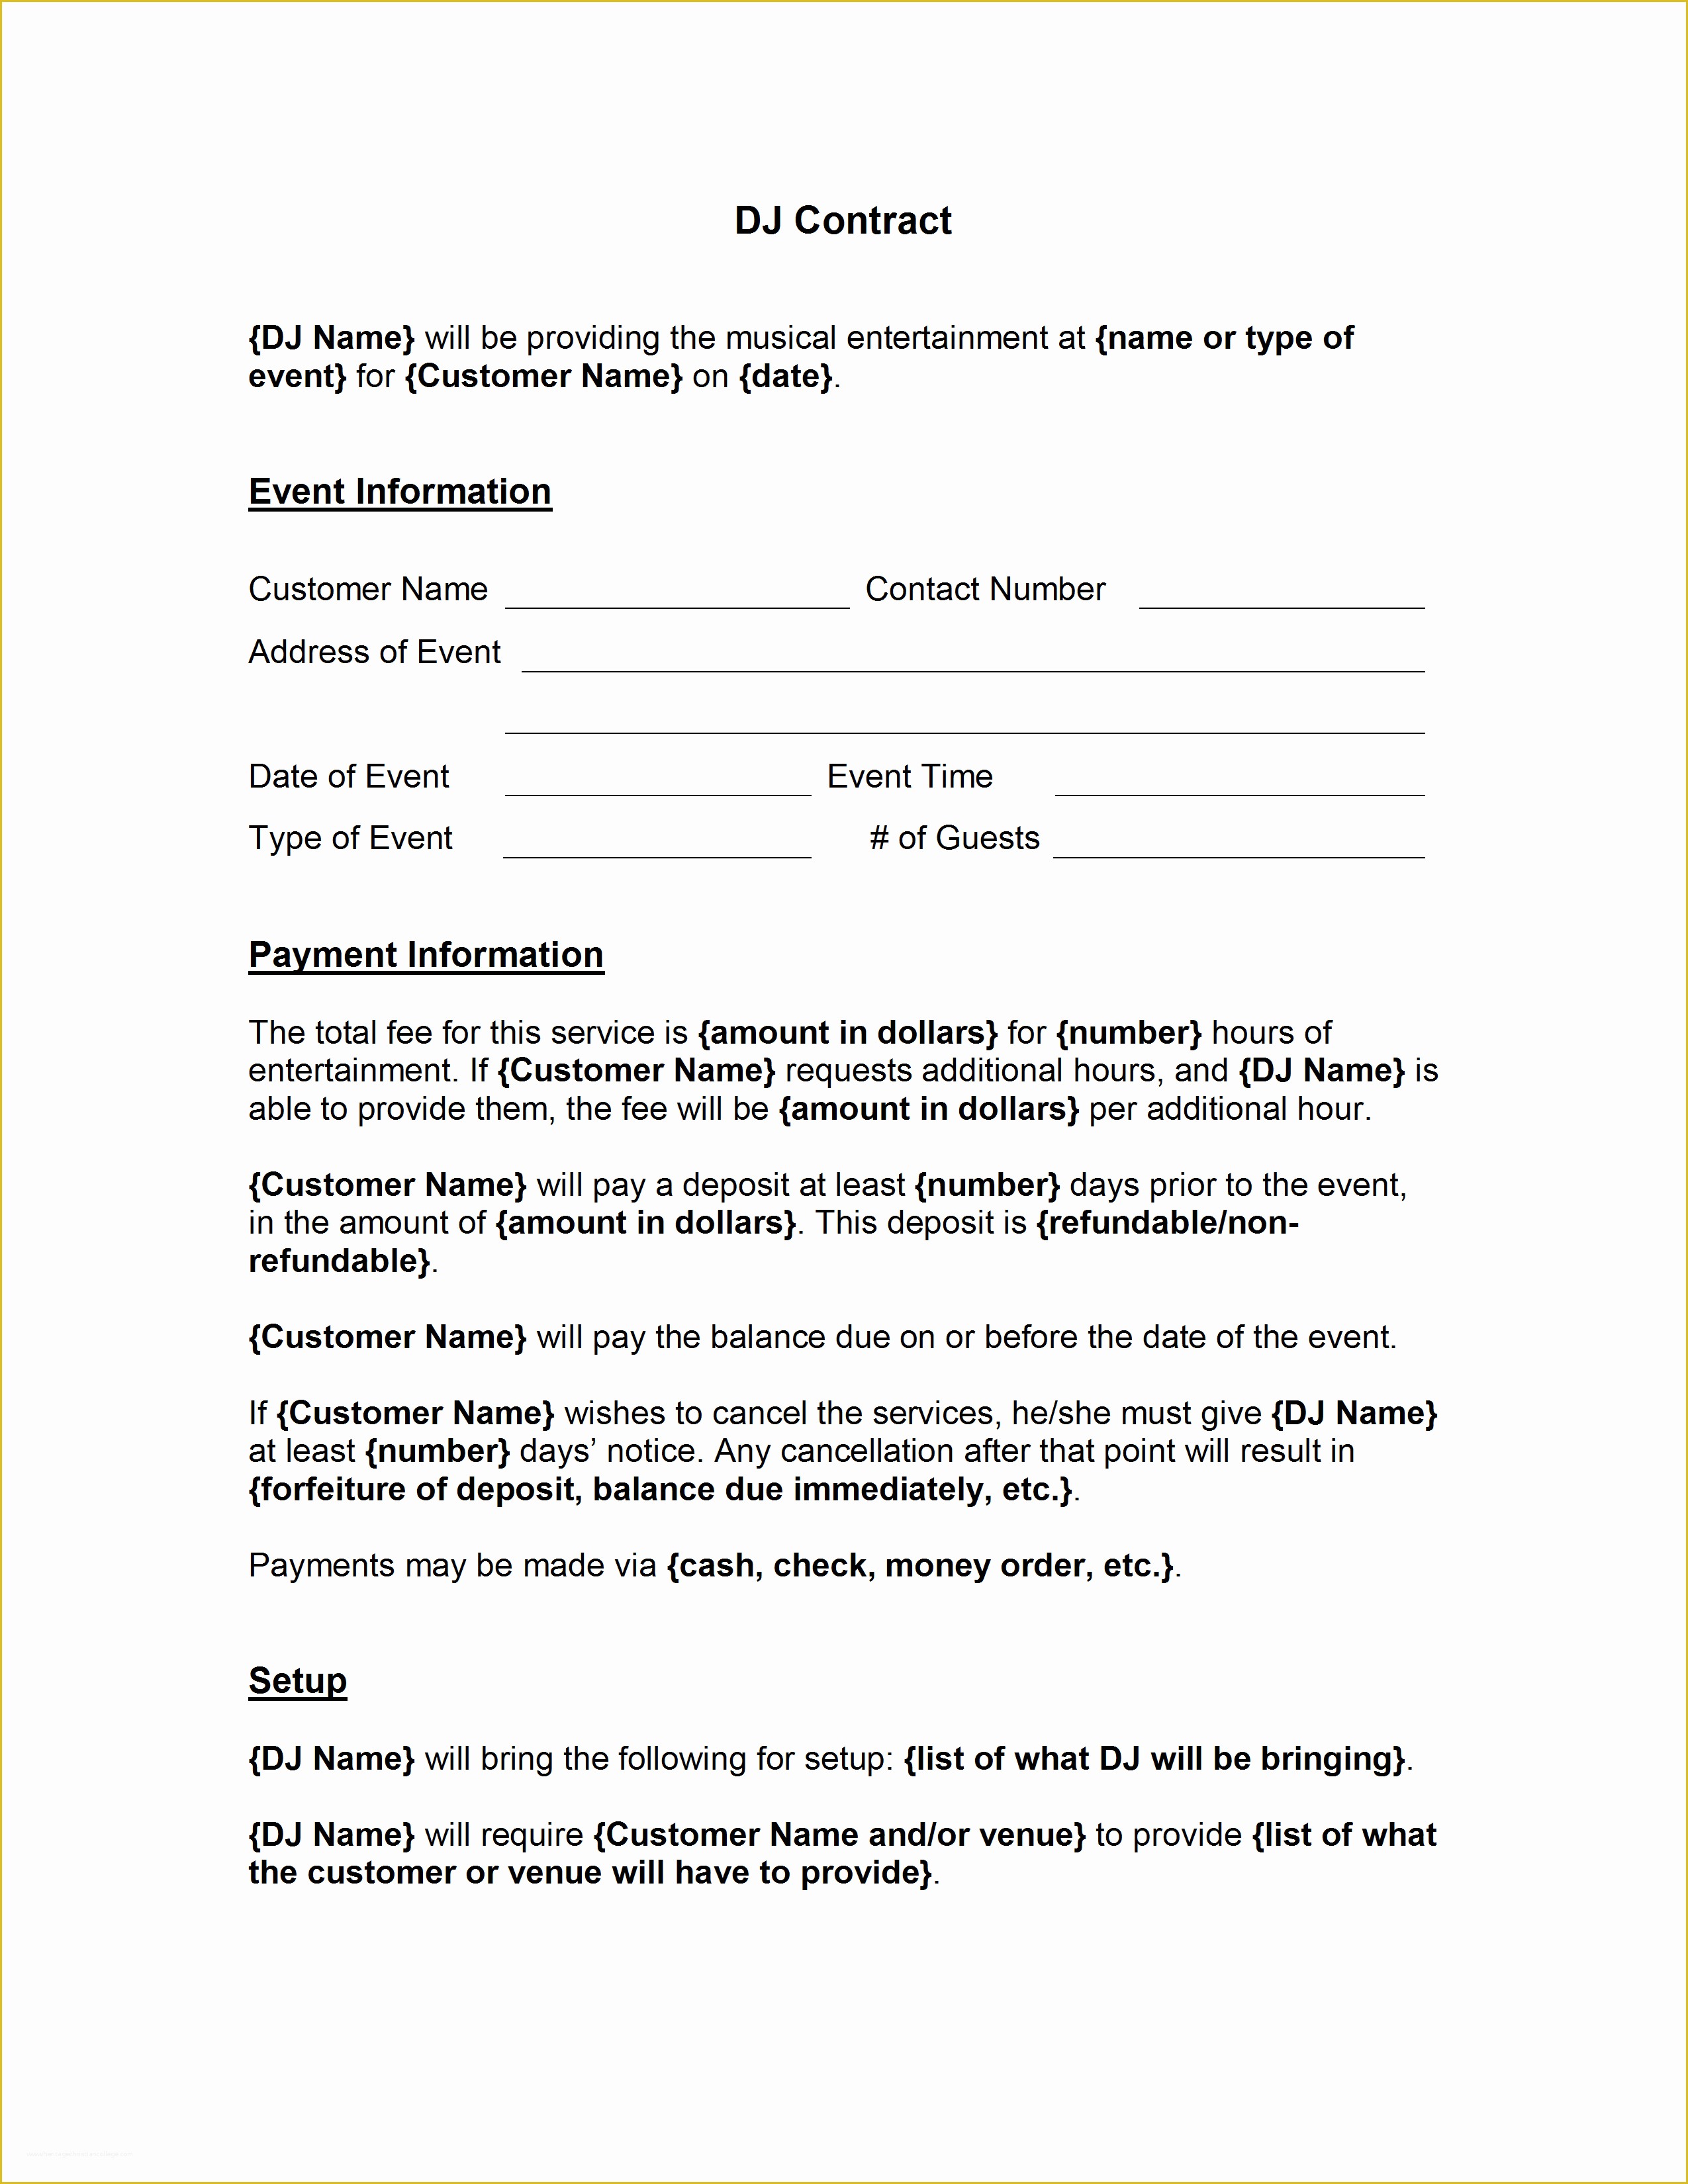 Free Contract Templates Of Dj Contract Template